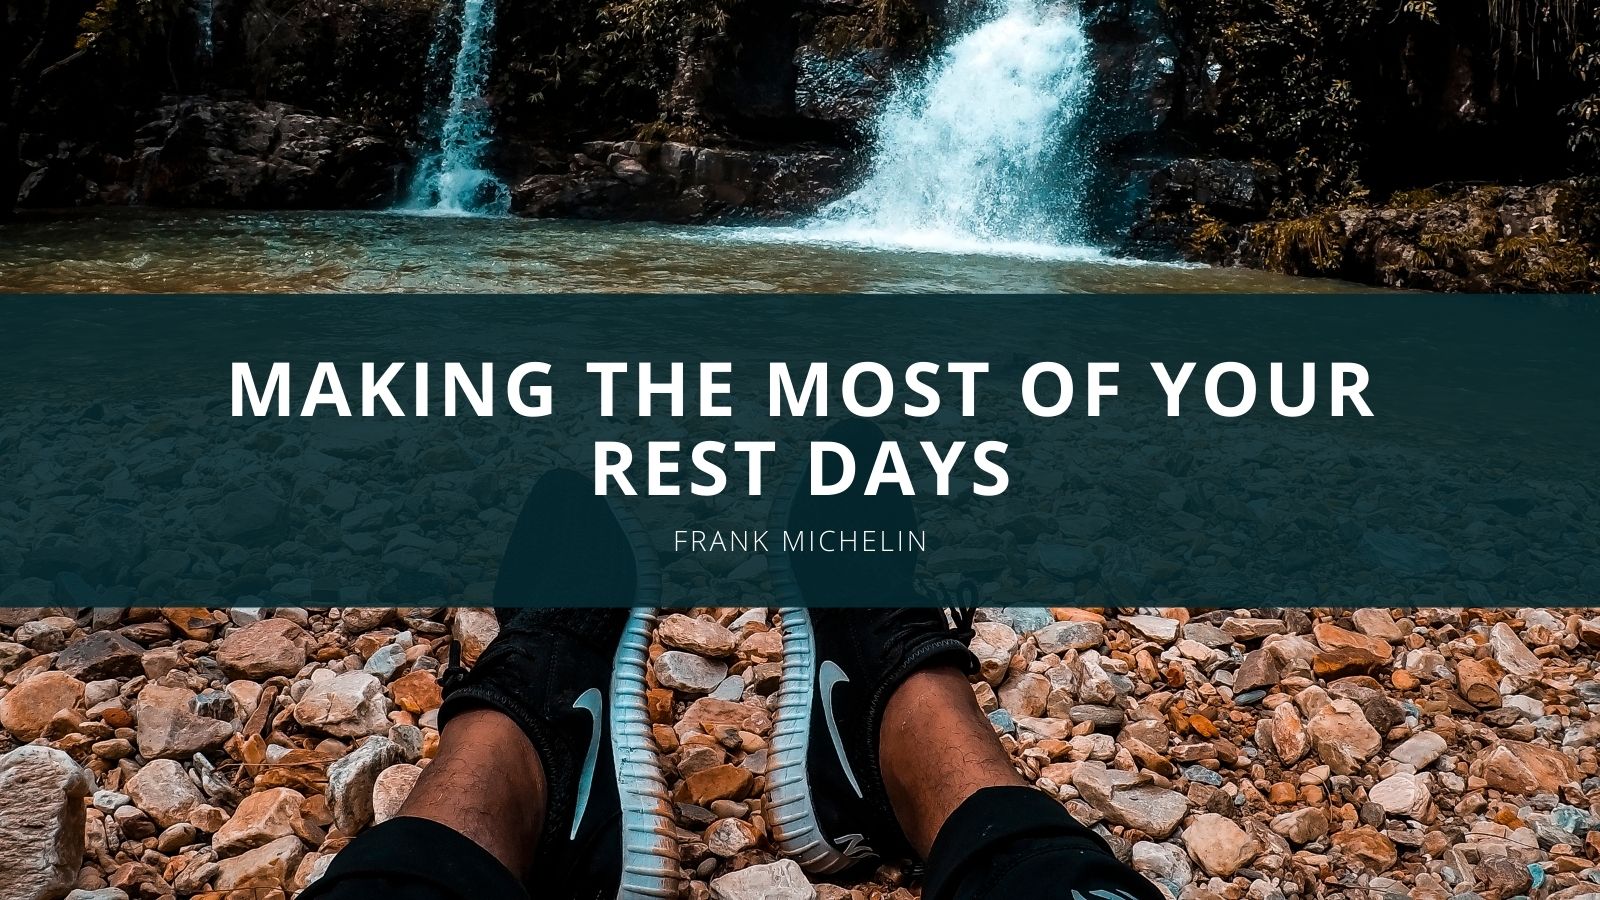 MAKING THE MOST OF YOUR
REST DAYS

FRANK MICHELIN